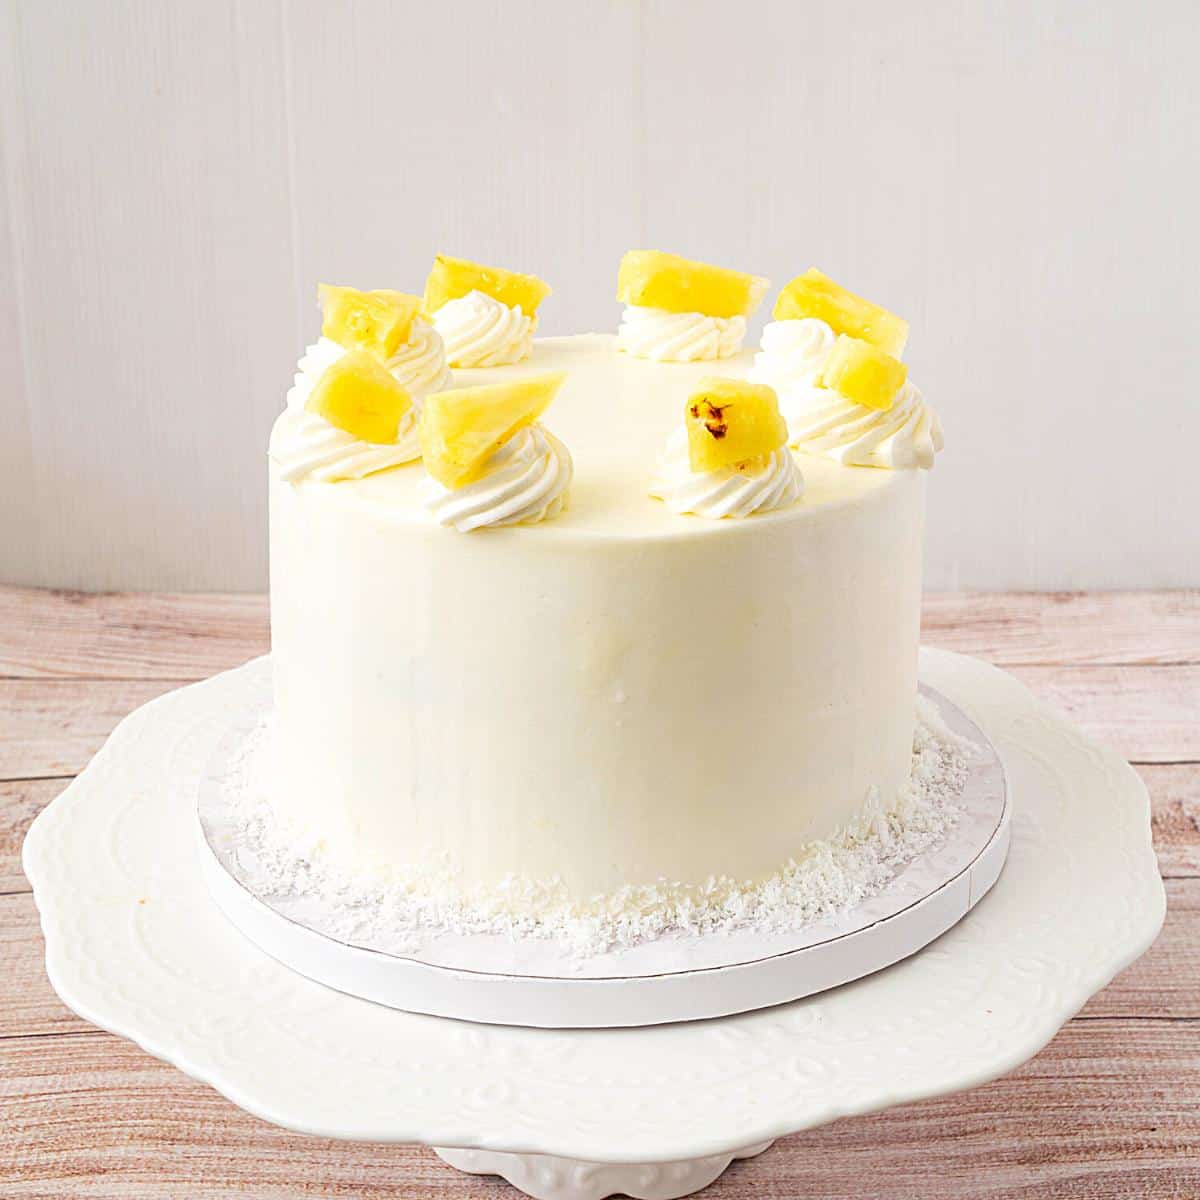 A frosted pina colada cake.